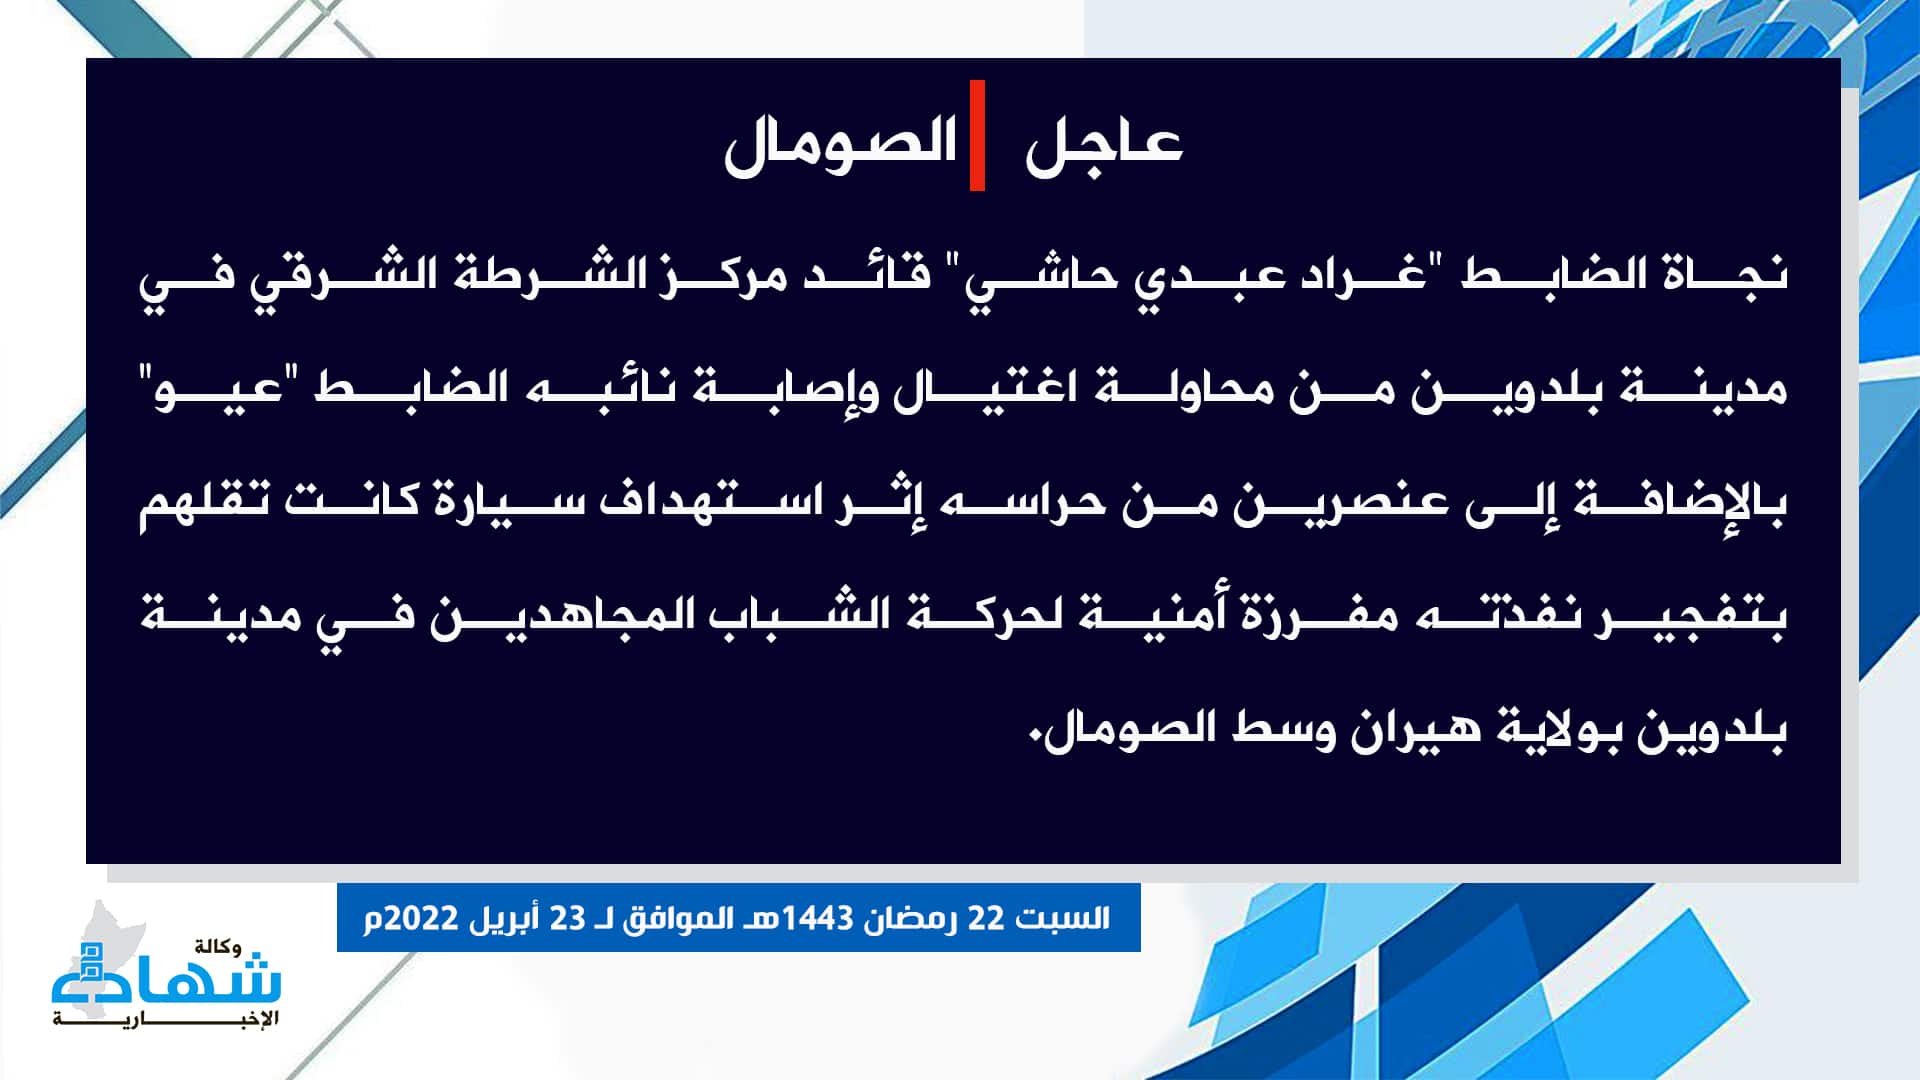 (Claim) al-Shabaab: The Commander of the Eastern Police Station, Grad Abdi Hashi, Survived an Assassination Attempt, His Deputy Was Injured, and Two of His Guards Were Injured in an IED Attack in Baldwin City, Hiran, Somalia - 23 April 2022